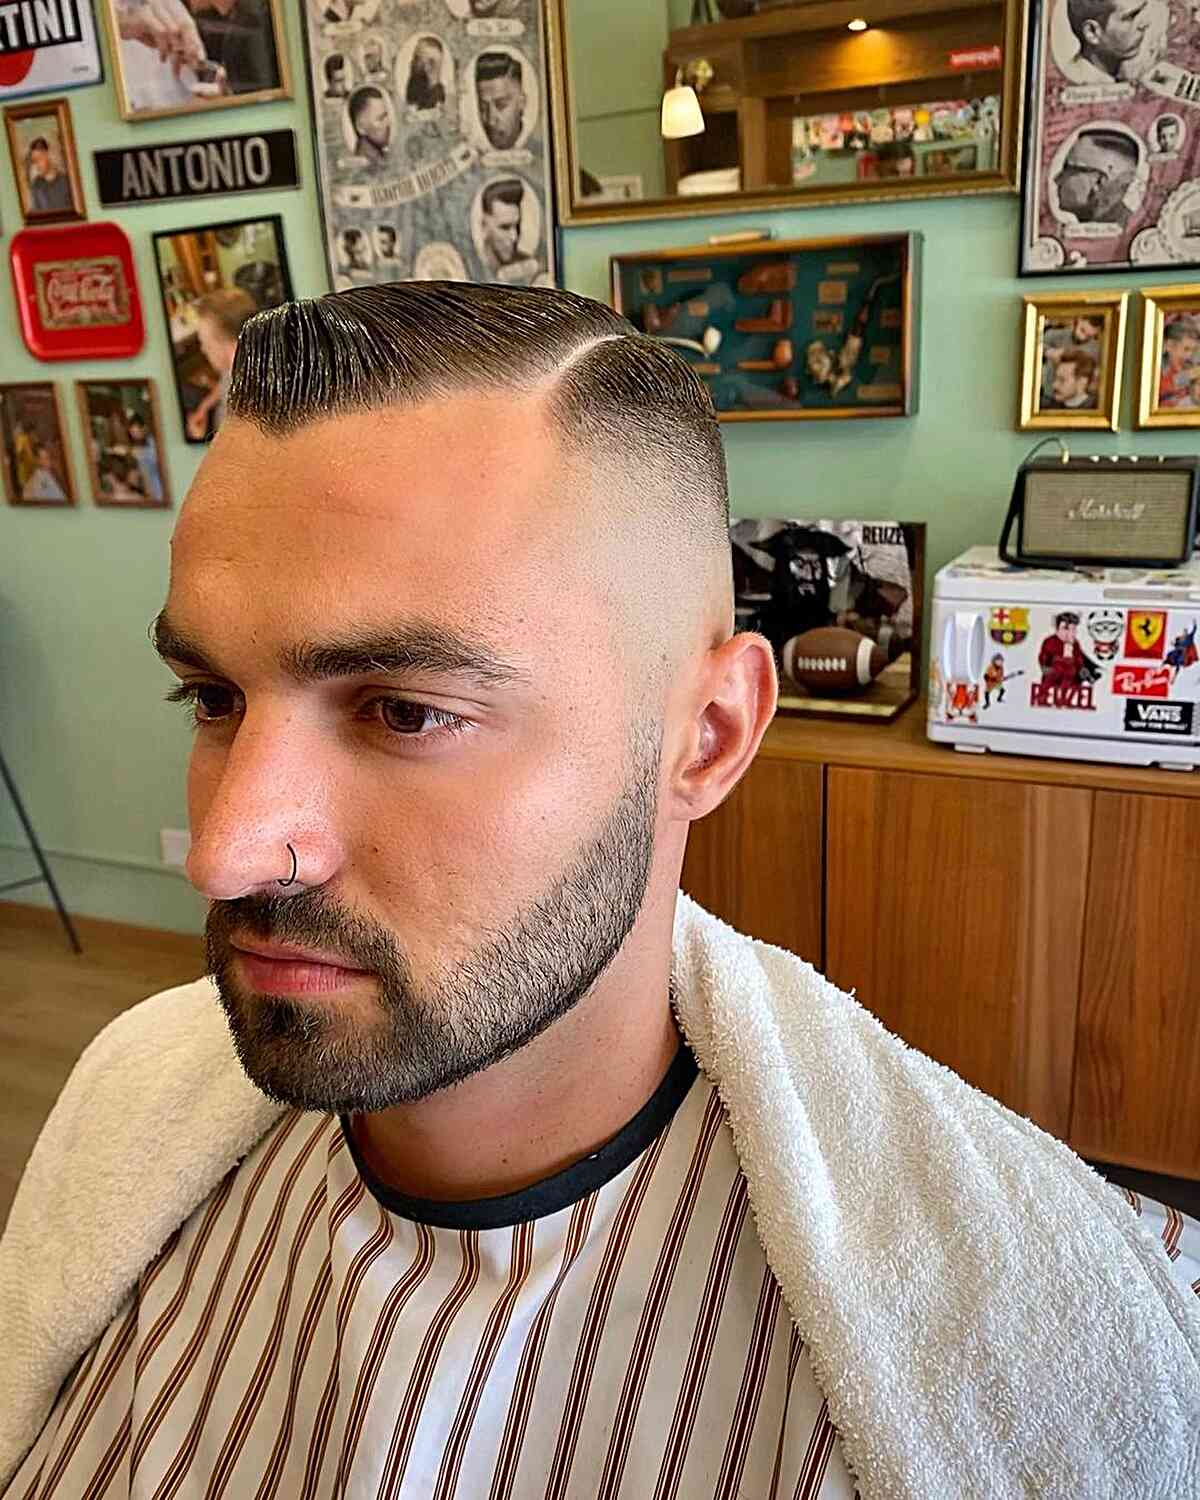 50 Cool Very Short Haircuts For Men in 2023